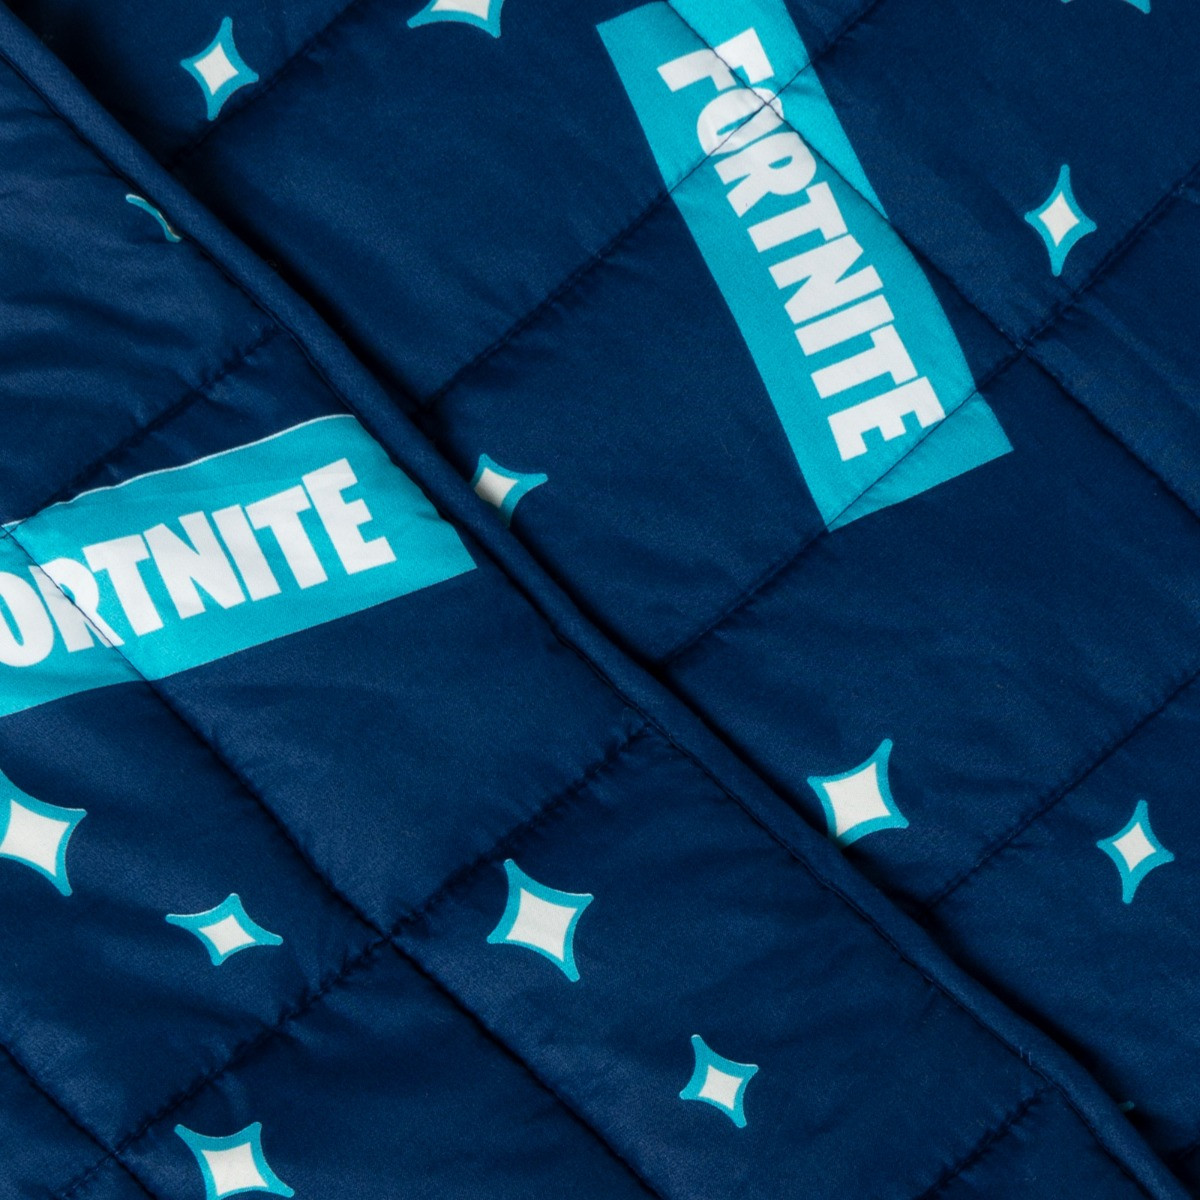 Fortnite Party Weighted Blanket, Navy Blue - 3kg>